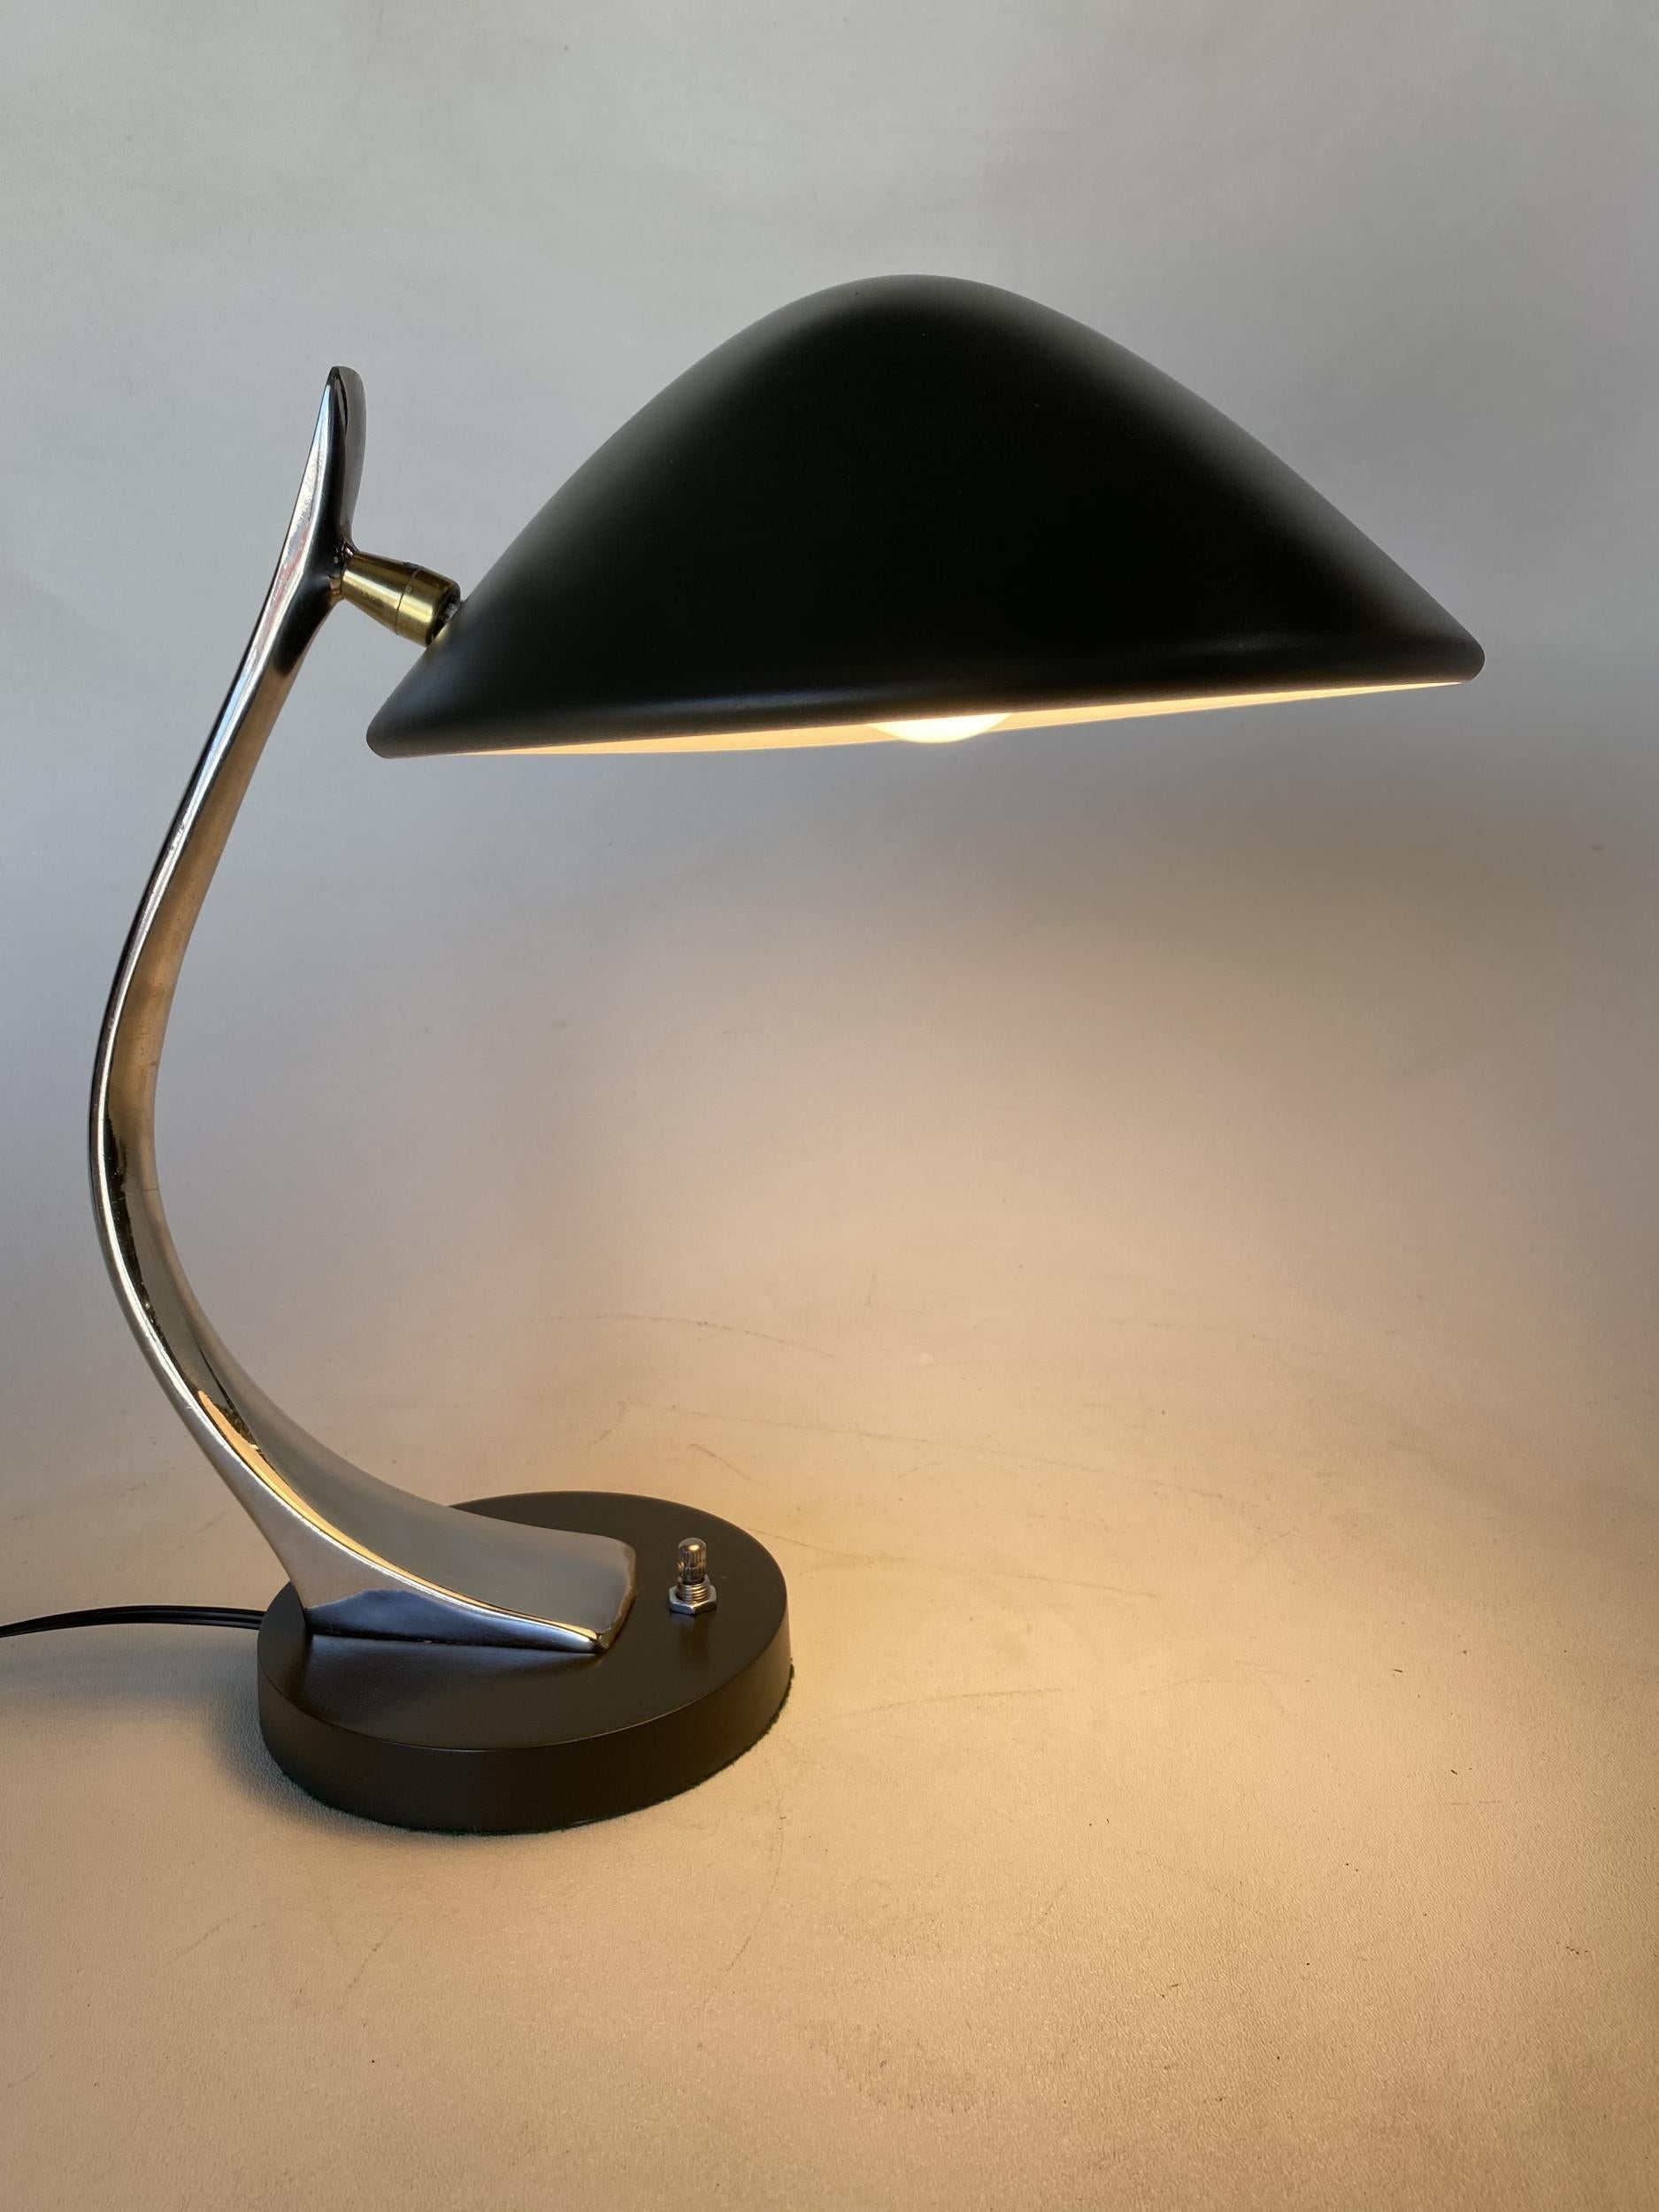 High style cobra desk lamp by Laurel Featuring heavy mid-century styling with a black enamel shade and base and freeform solid brass steam.